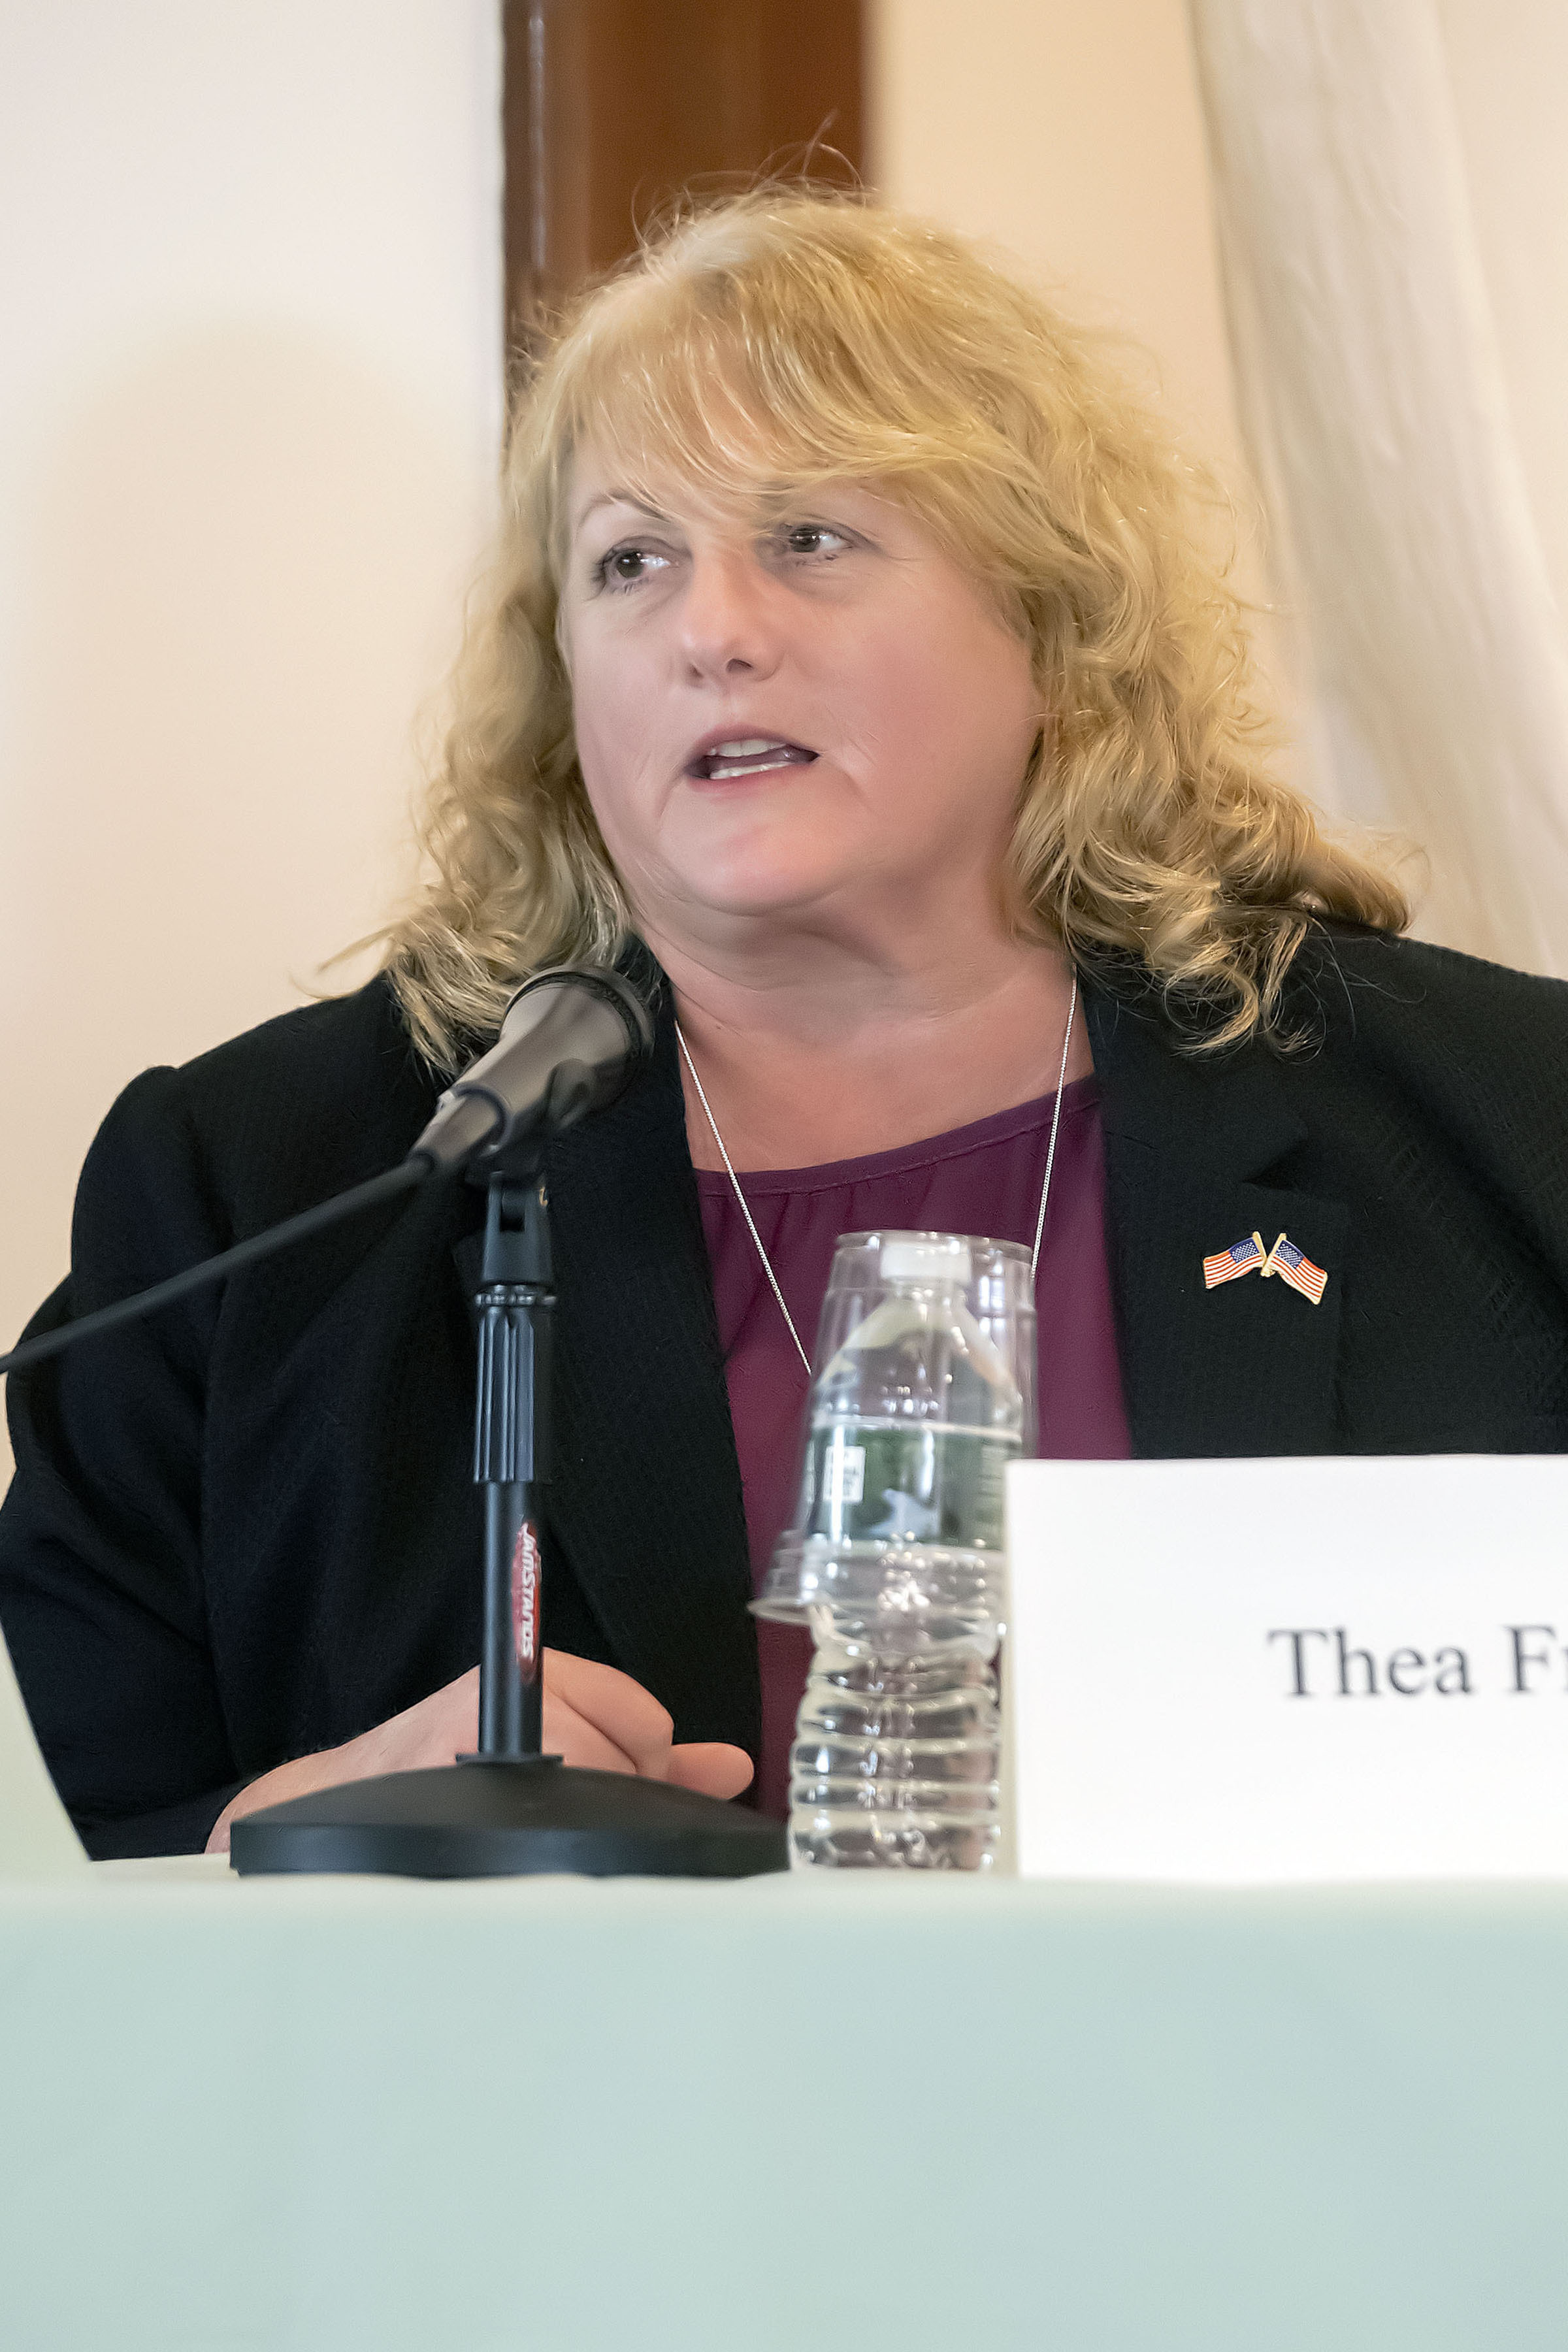 Southampton Town Trustee Candidate Thea Fry during a Meet the Candidates night at the Water Mill Community House on Wednesday, October 17.  MICHAEL HELLER